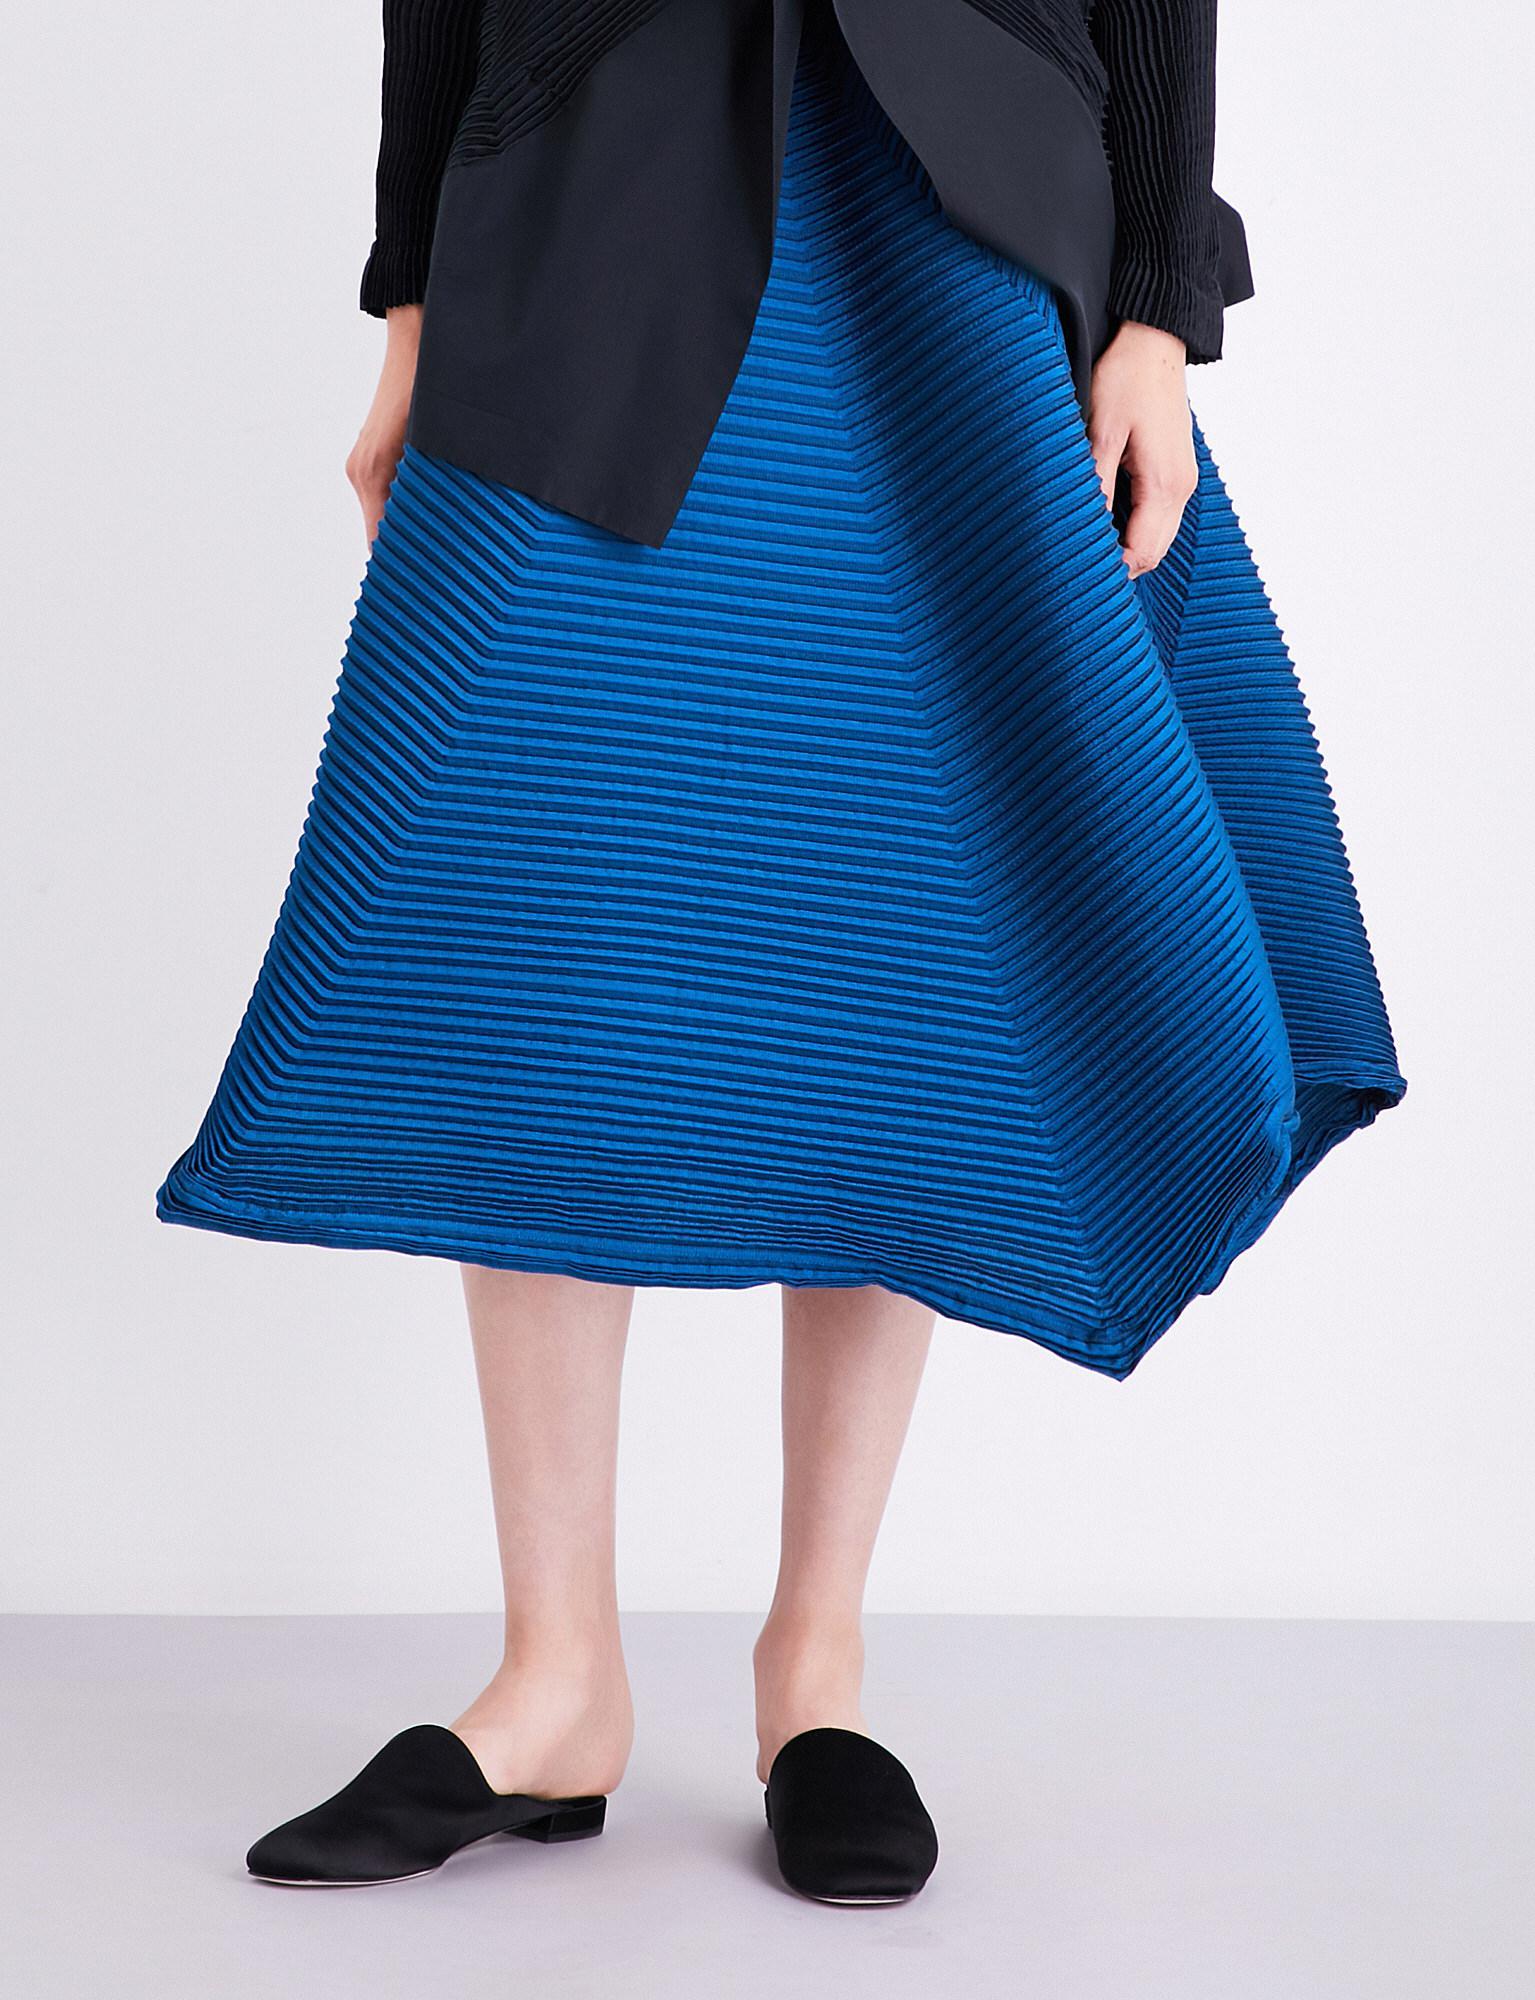 Issey Miyake Blue Polygon Pleat Architectural Avant Garde Skirt.  Approximate original retail $1788 CAD. Elastic waist,  full triangular pleated profile,  side pockets on seam.  Marked size M but since the waist is elastic, can fit about a USA